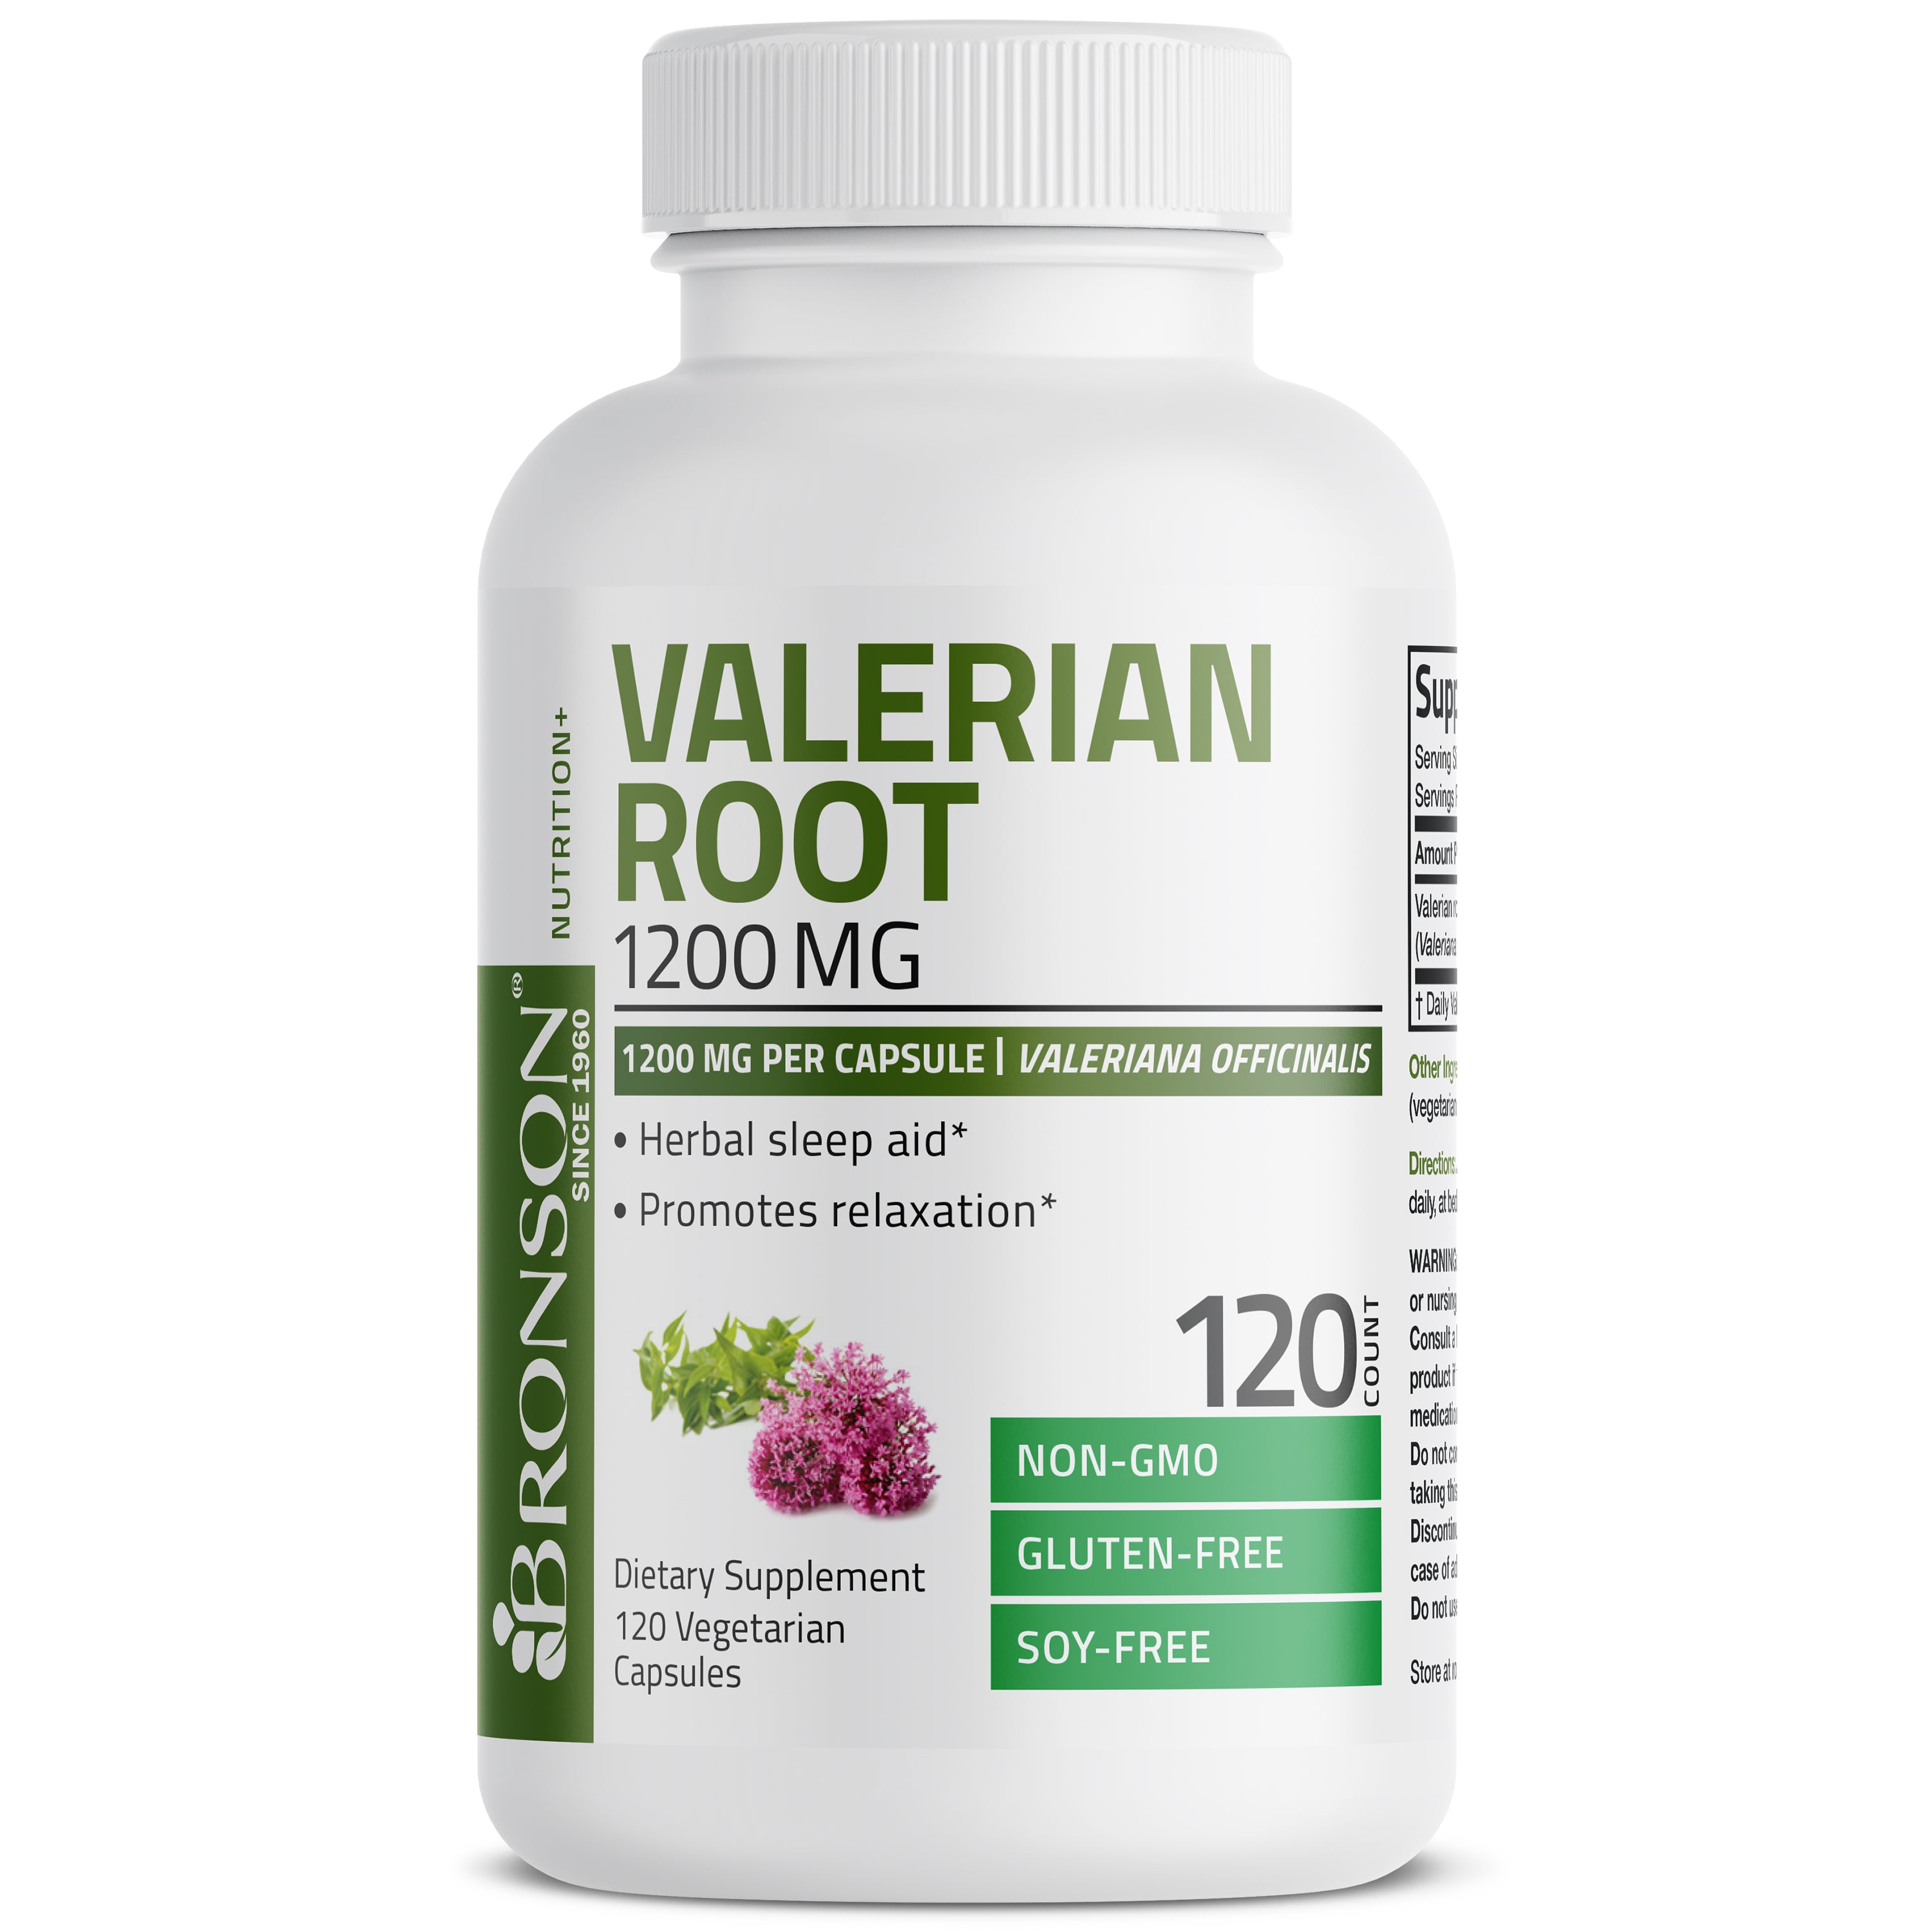 Valerian Root 1200 mg view 4 of 6